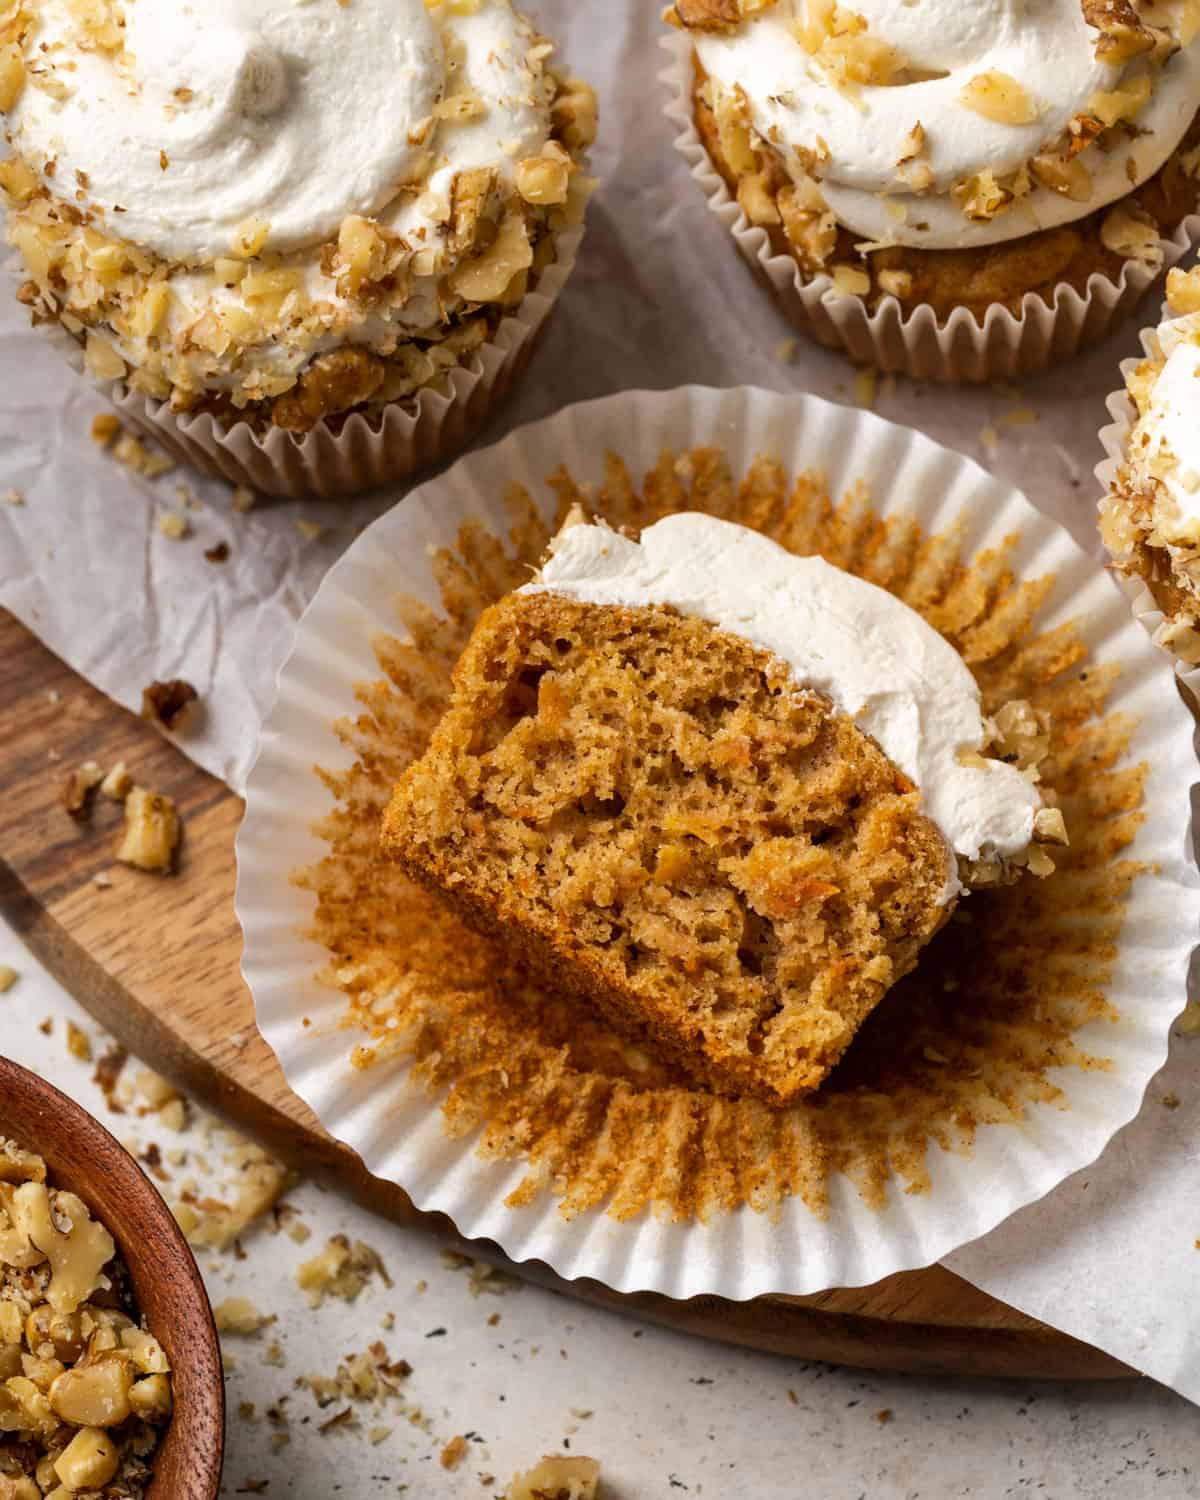 Carrot cake cupcake cut in half and laying on a wooden cutting board.